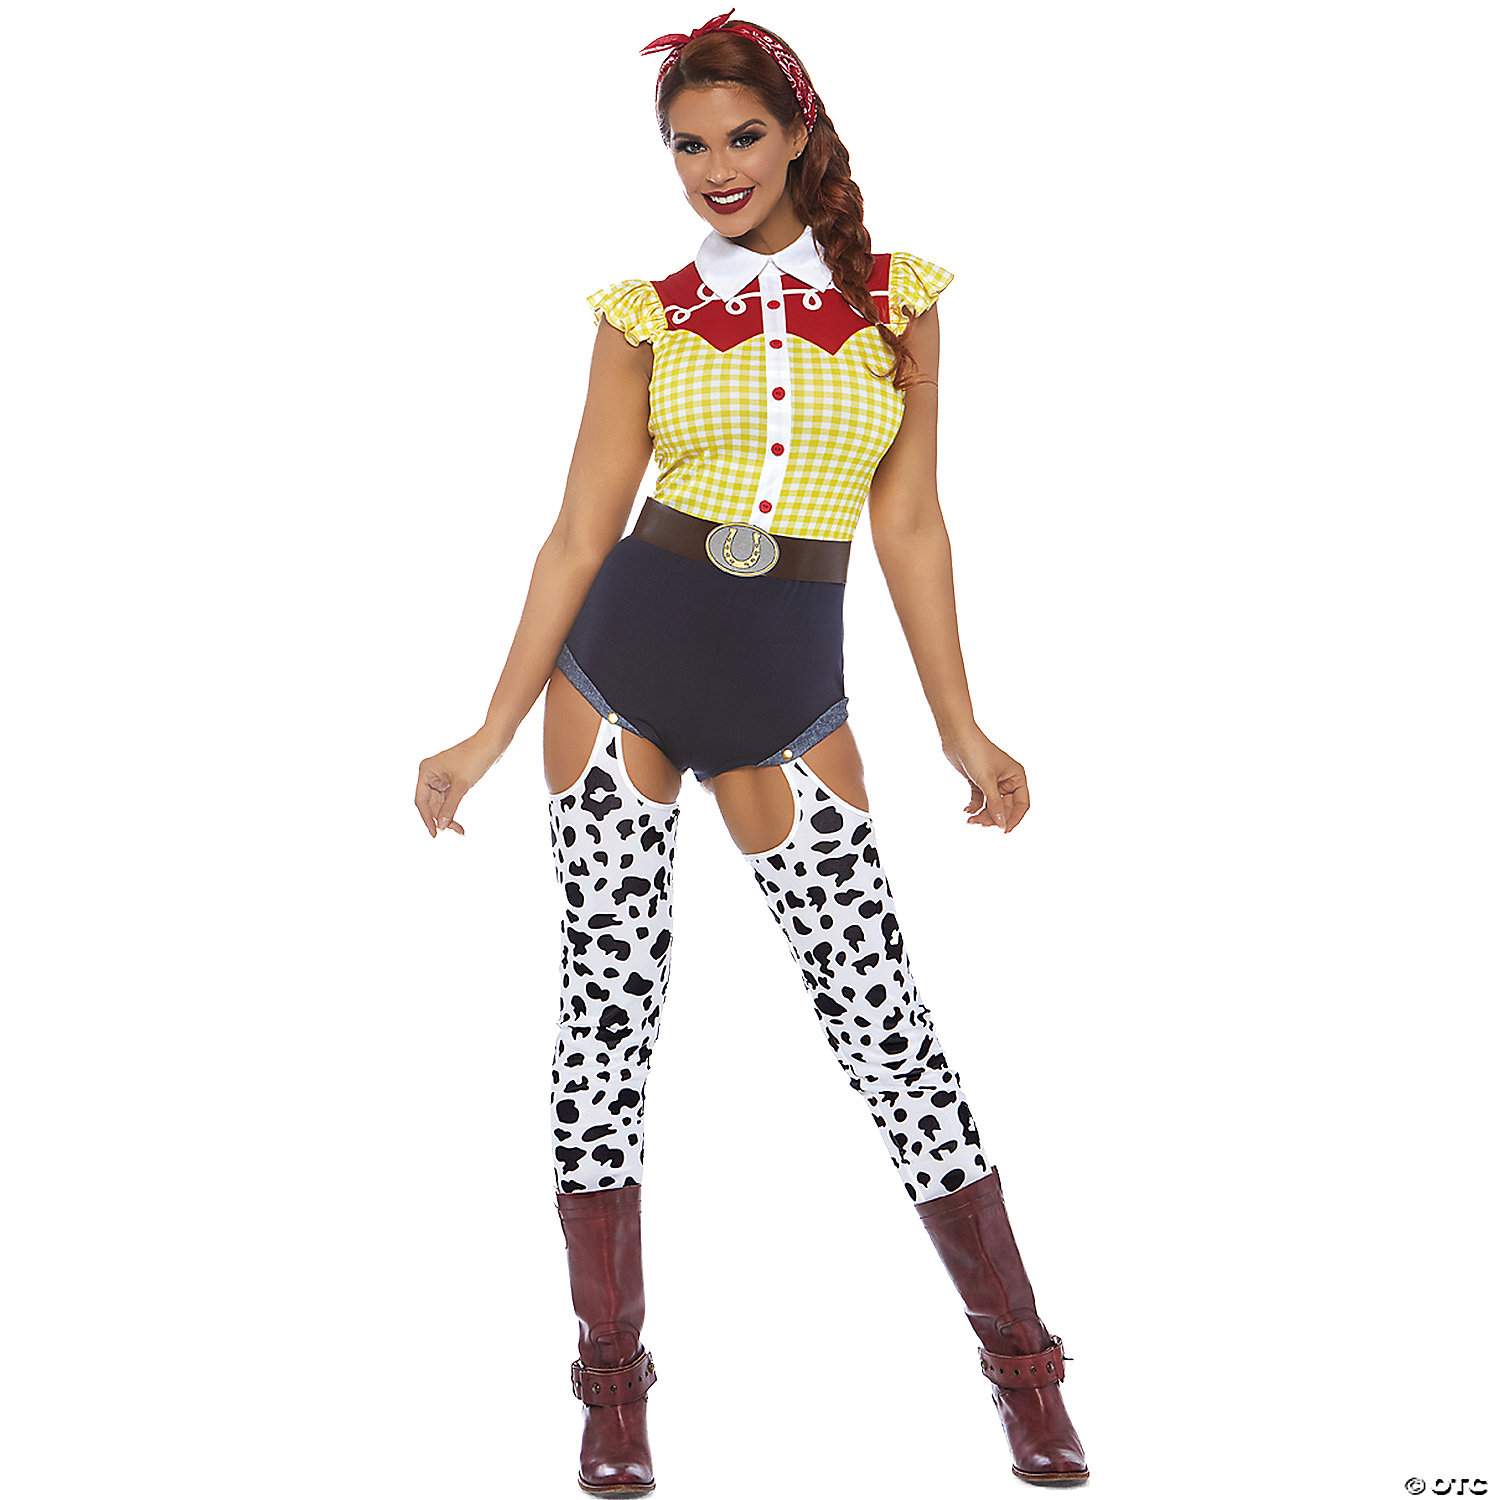 Giddy Up Cowgirl Adult Costume 2554